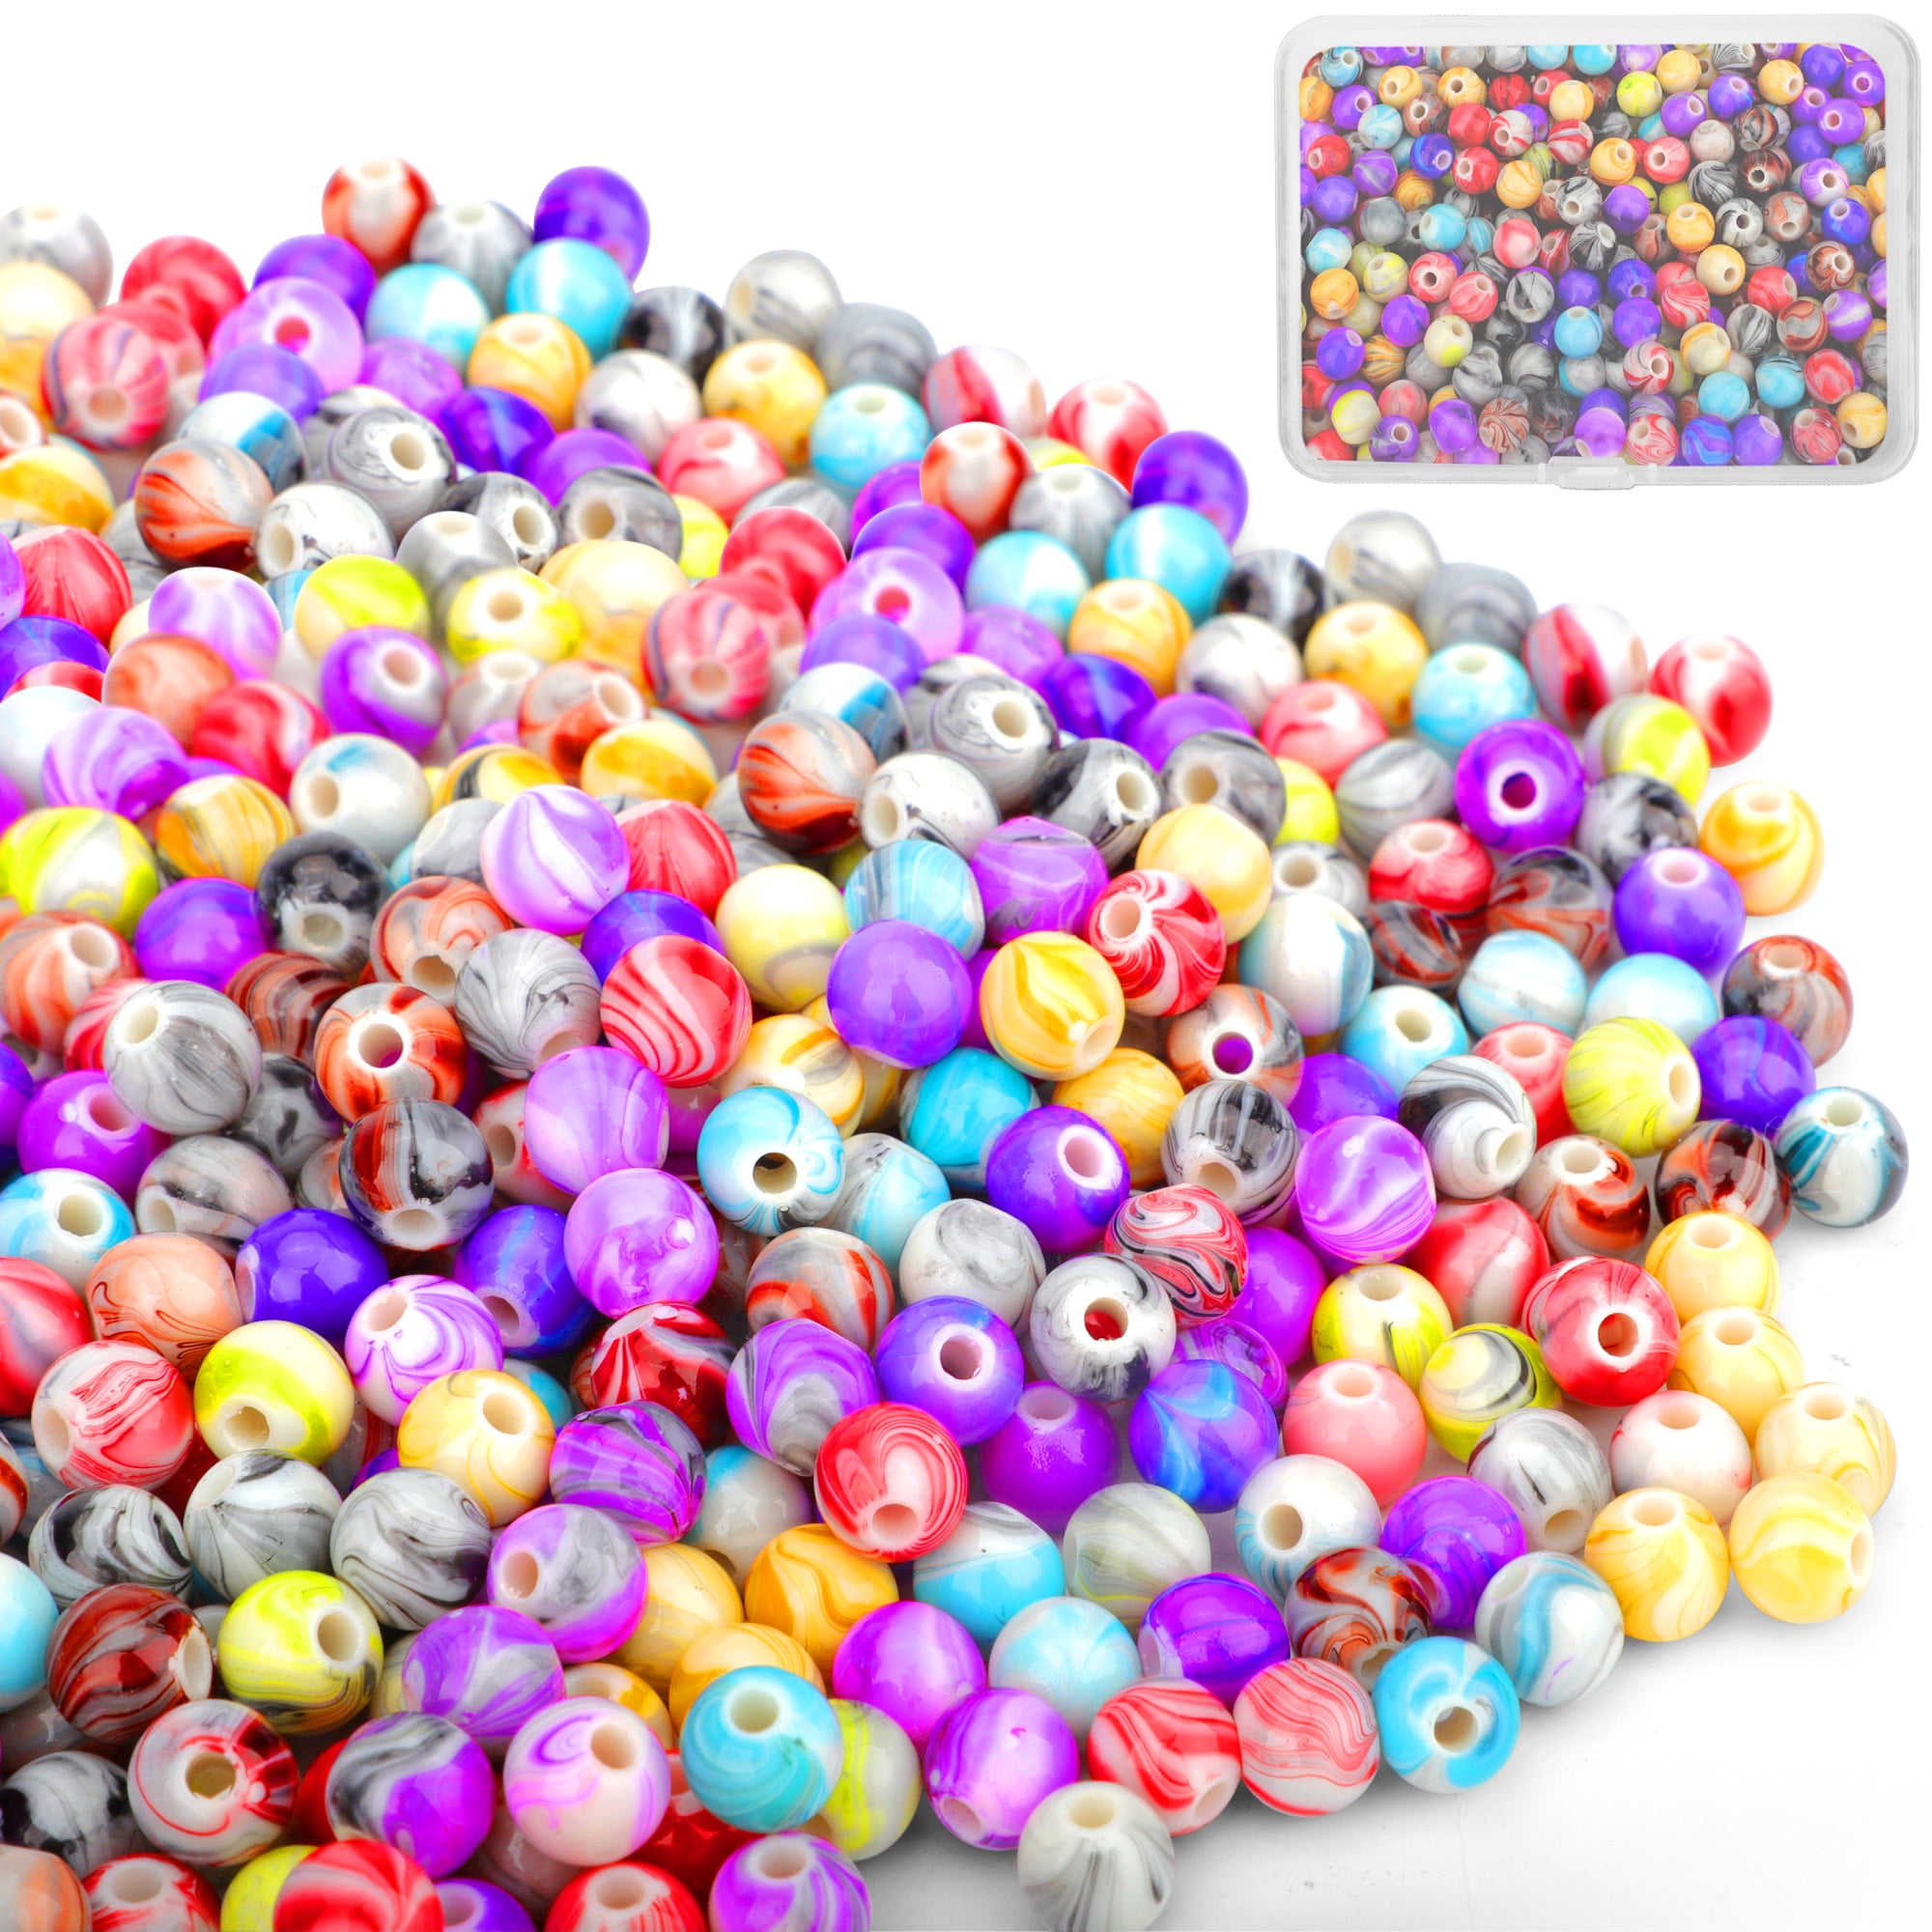 9mm 100pcs Love Heart Beads Macaron Colorful Acrylic Beads For Jewelry  Making DIY Jewelry Beads Necklaces Bracelets Accessories - AliExpress